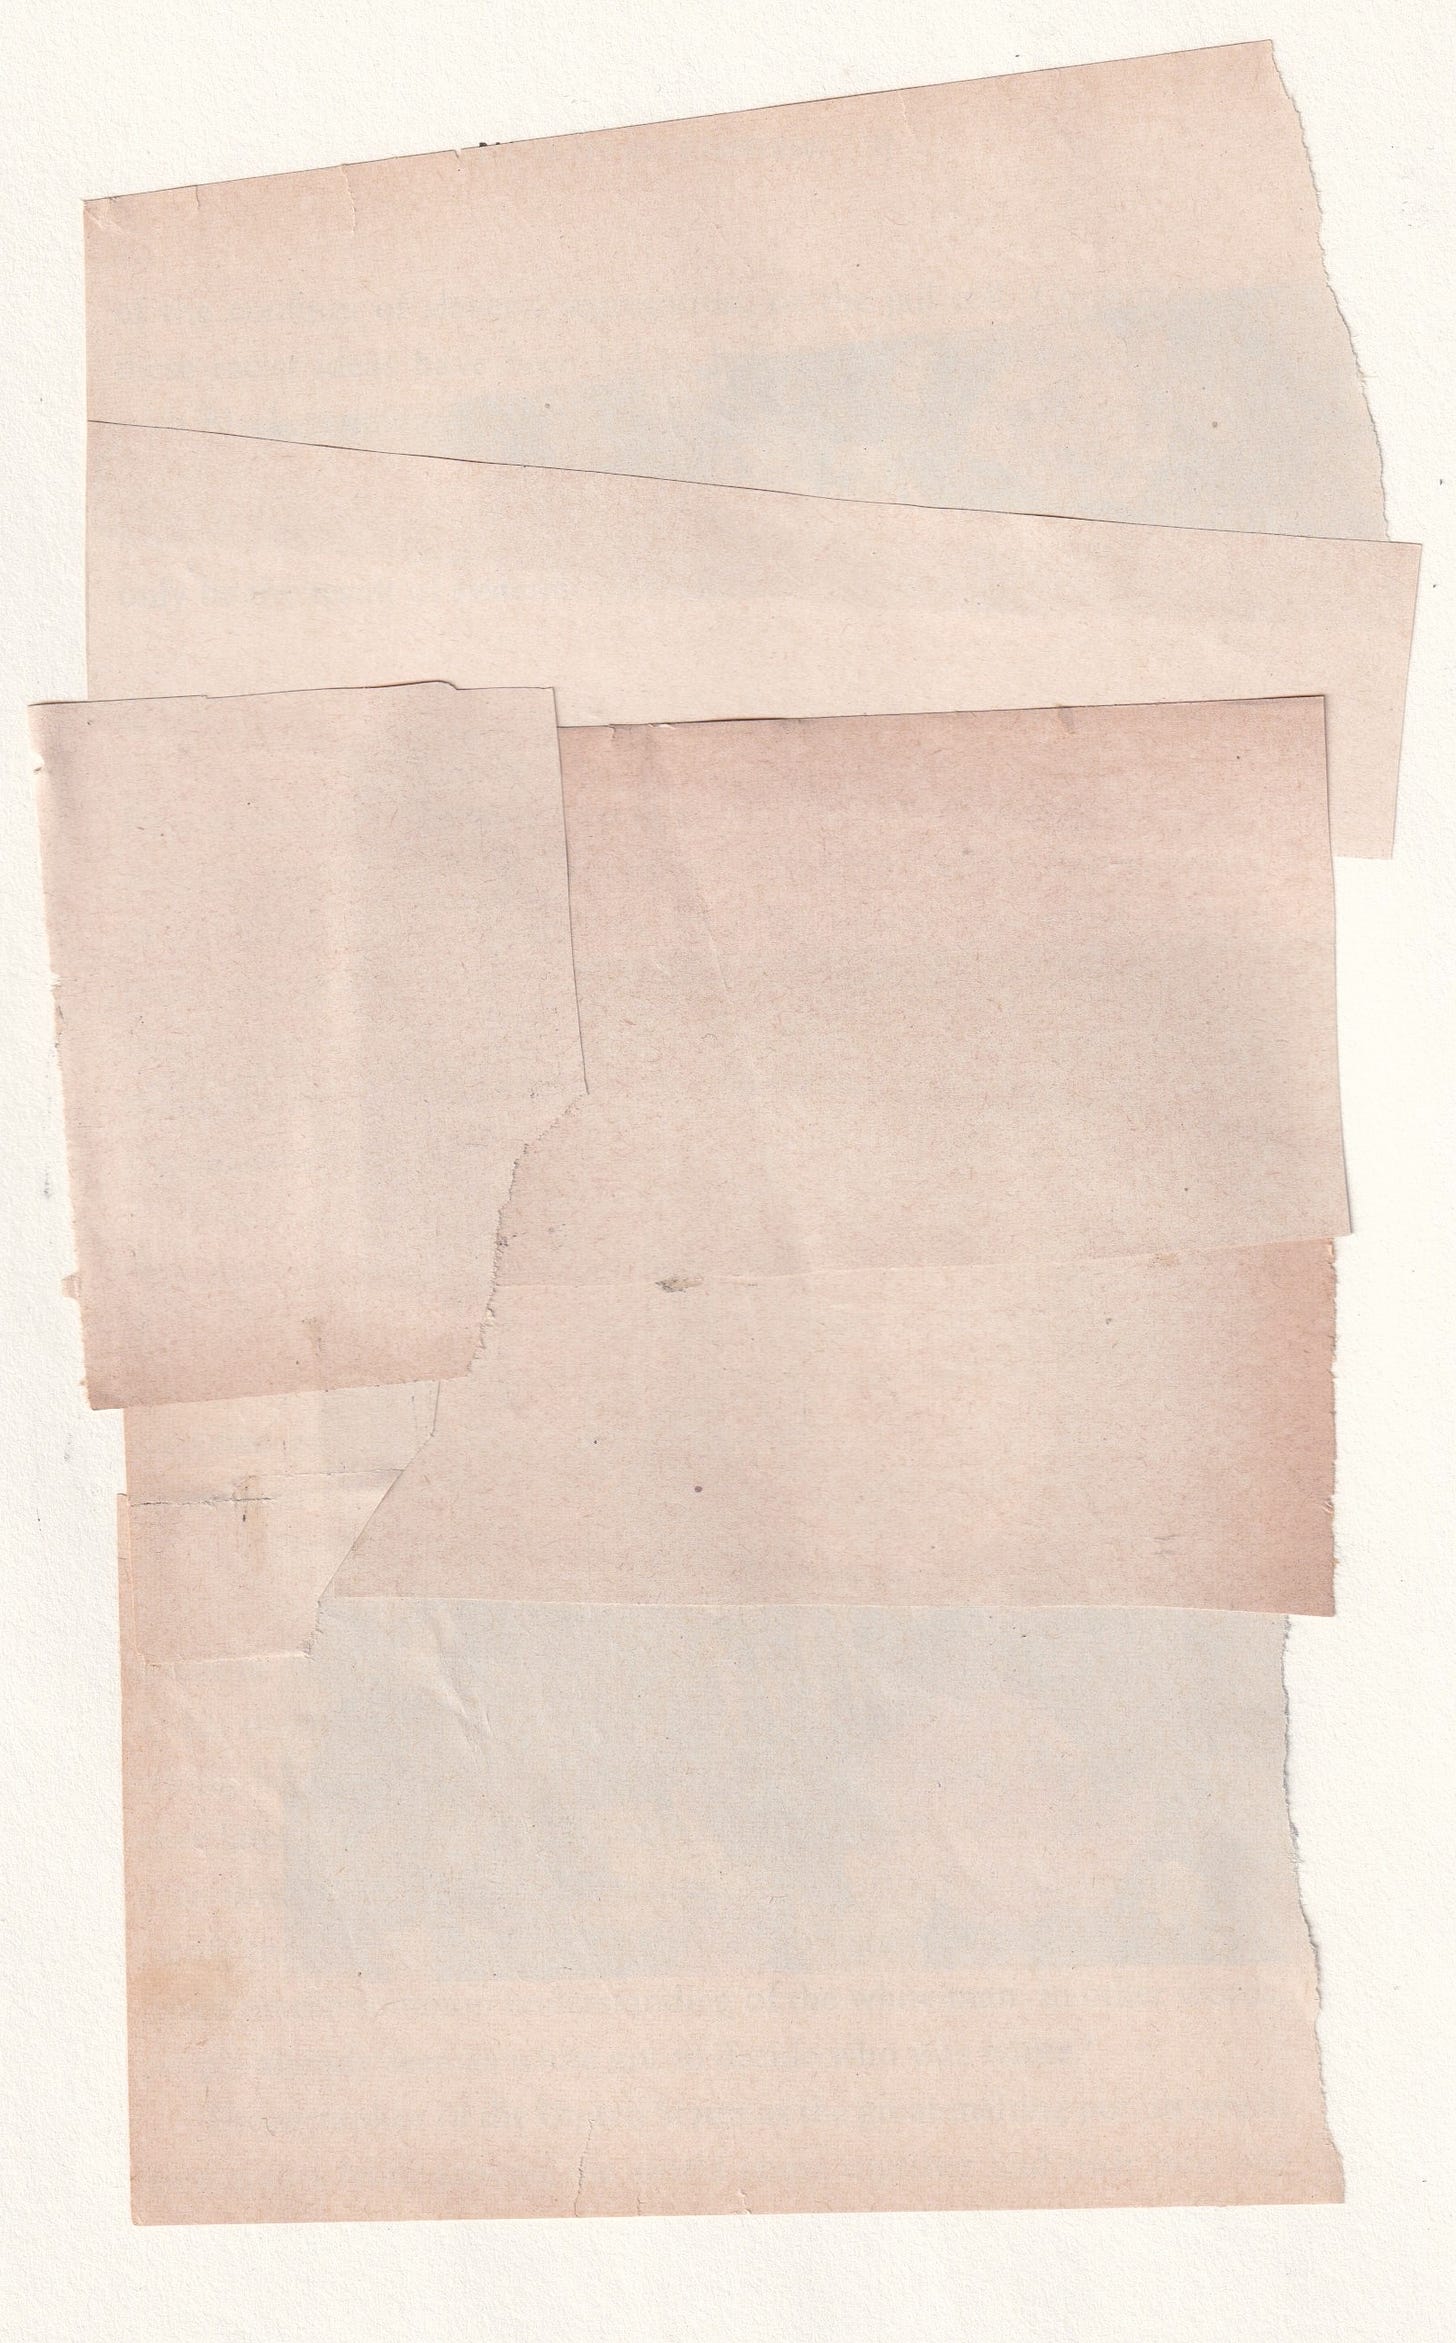 abstract composition of buff or off-white scraps of vintage paper arranged to cover text from the page of a banned book